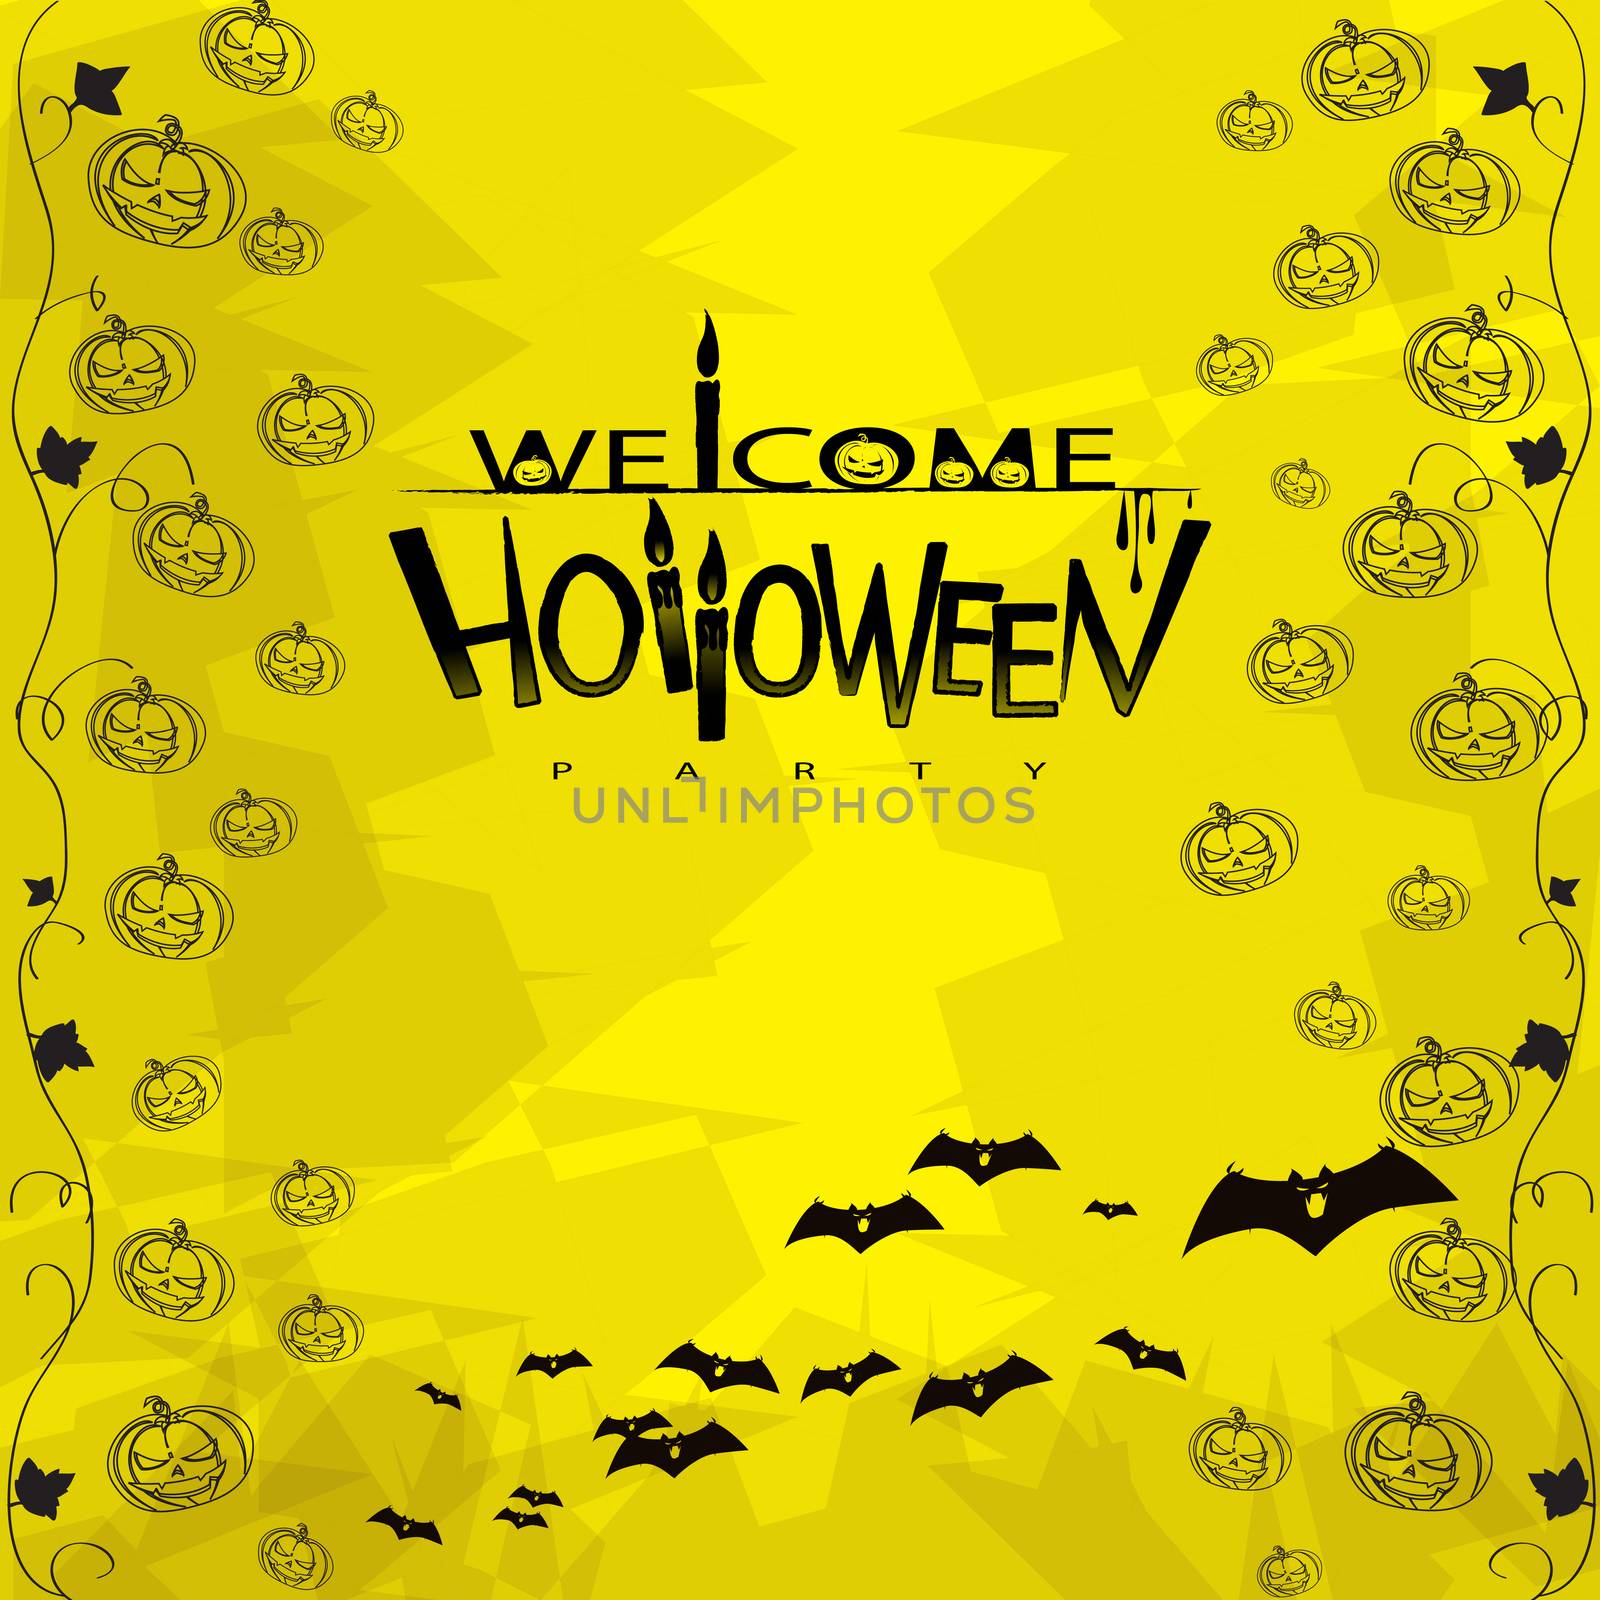 Party invitation Halloween with pumpkins, bats and candles by Rogalevv